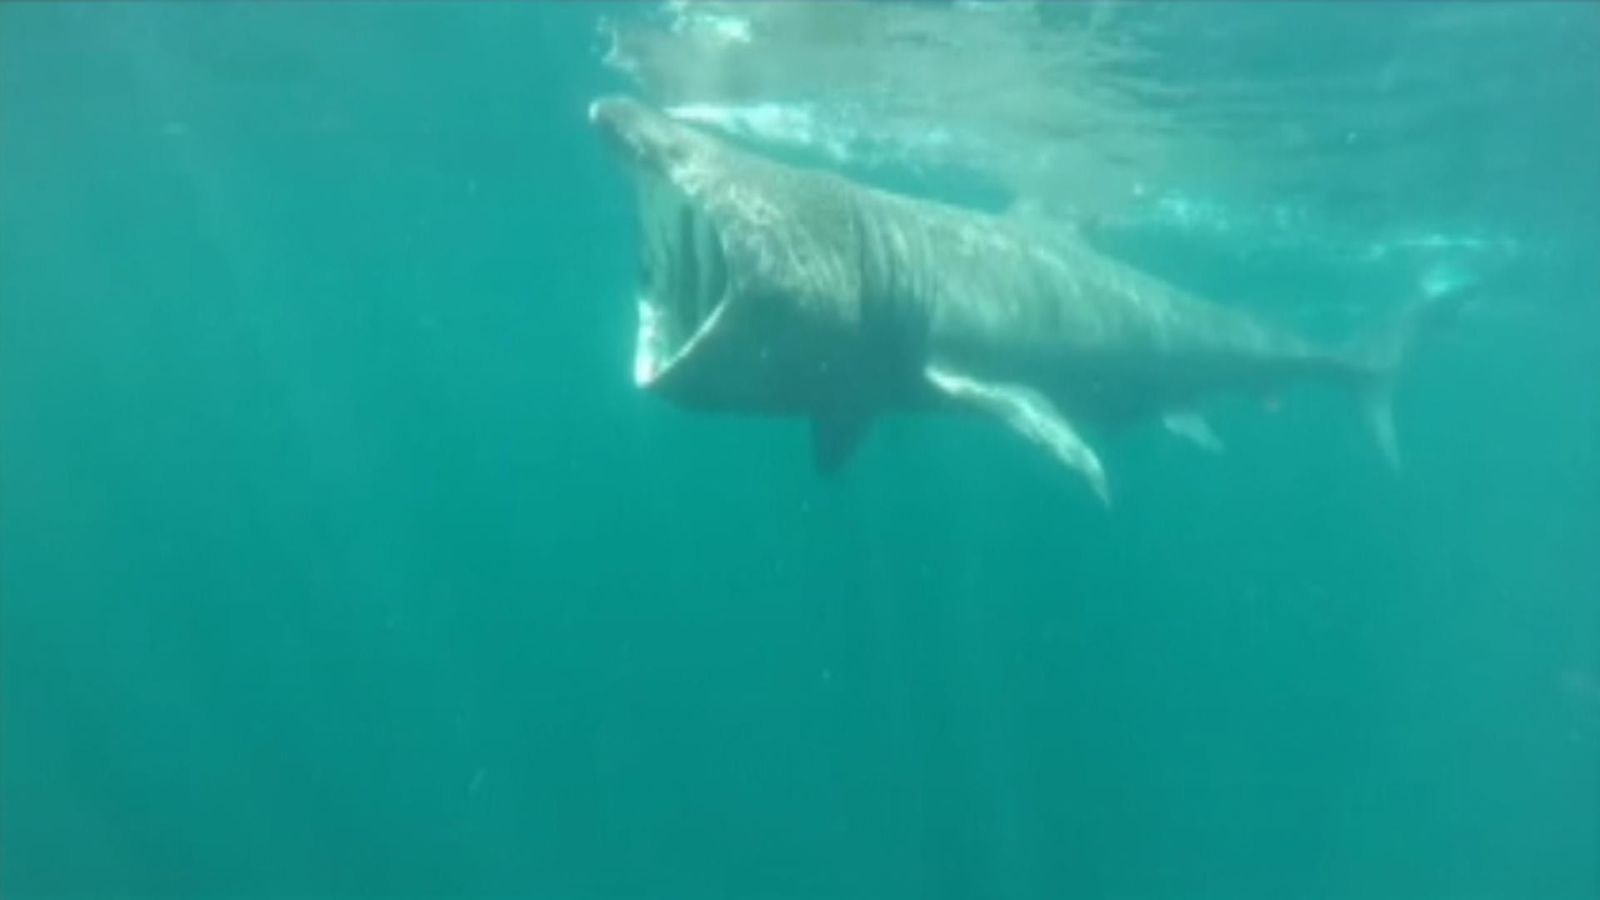 Researchers use underwater robot to better understand basking sharks in Scotland